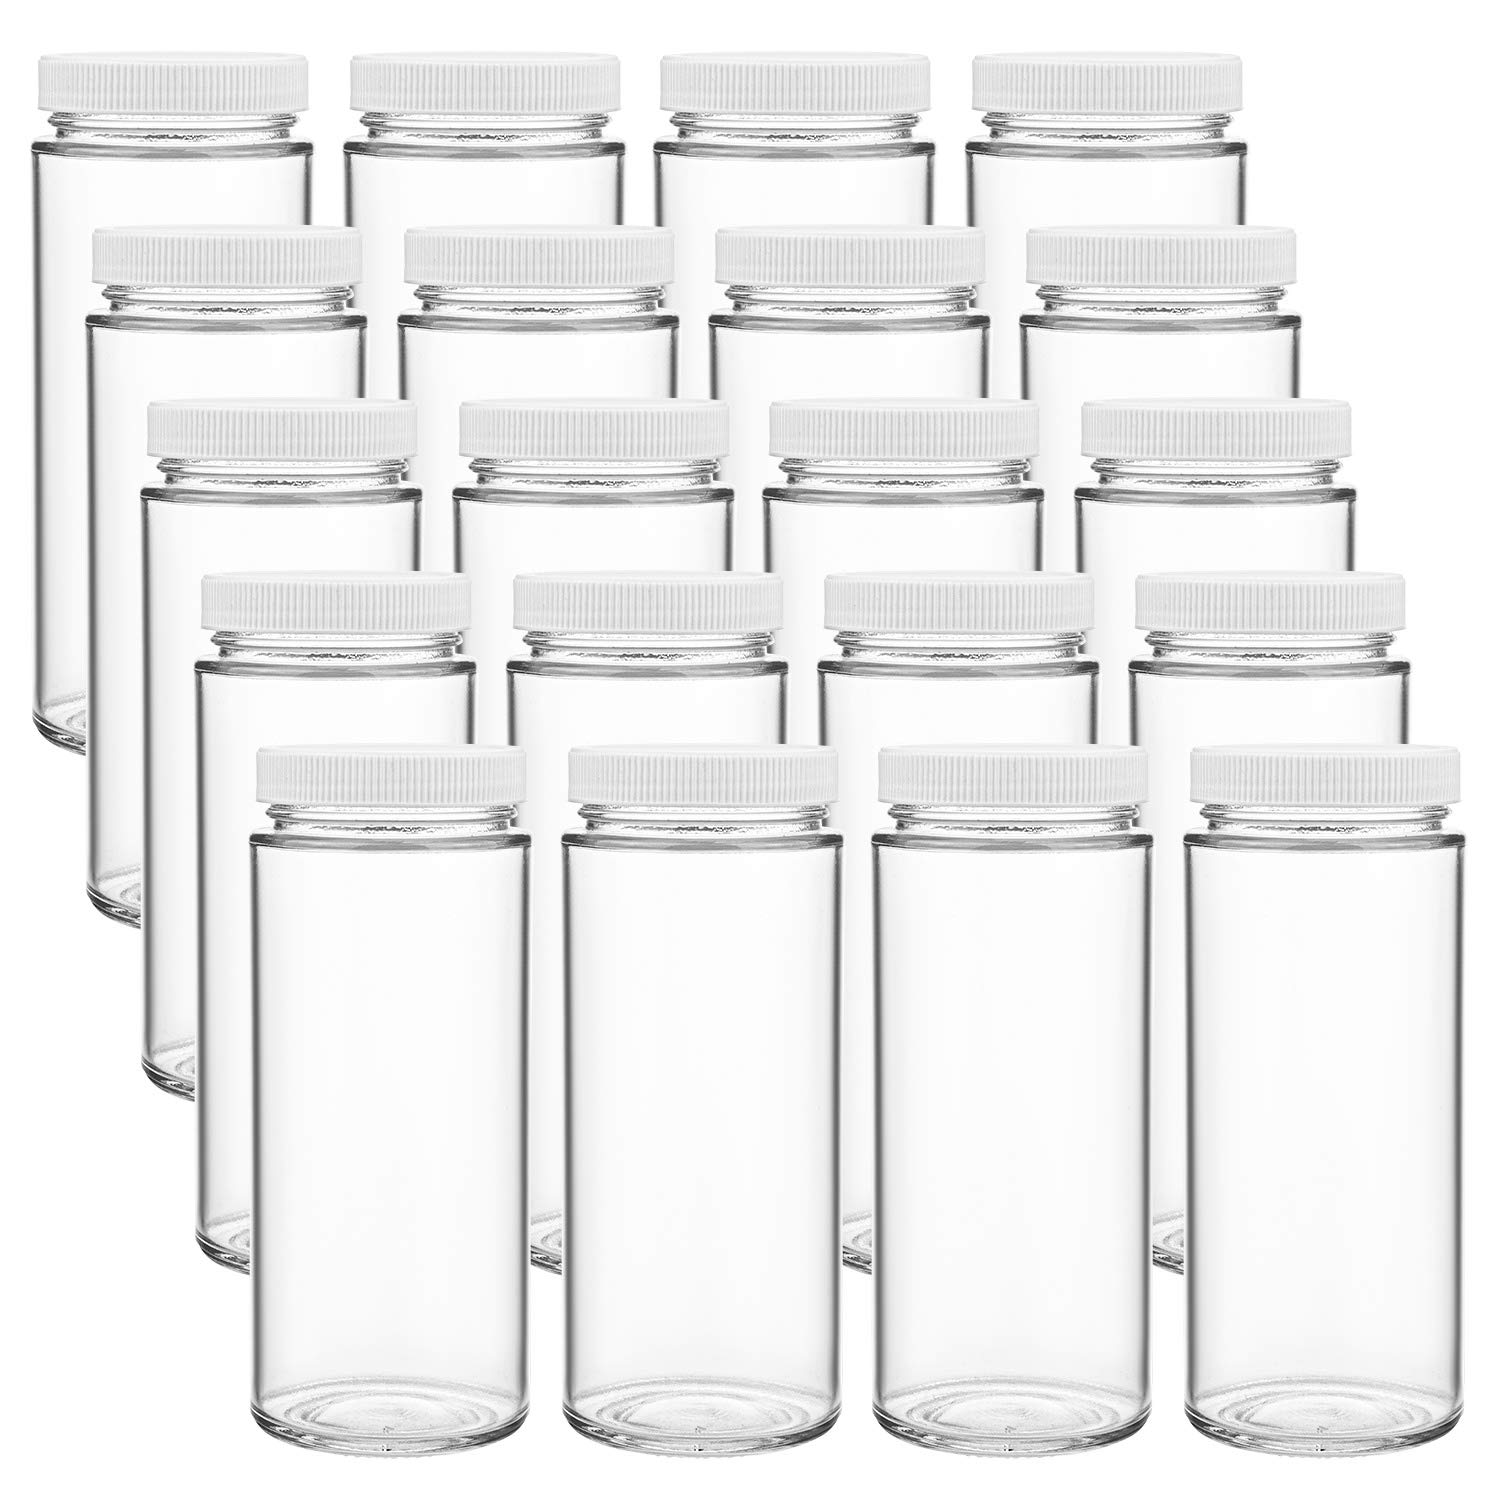 Suwimut 20 Pack Glass Jars With Lids, 12 oz Wide Mouth Glass Drinking Bottle Mason Canning Jars with Plastic Airtight Lids, Reusable Glass Water Bo...